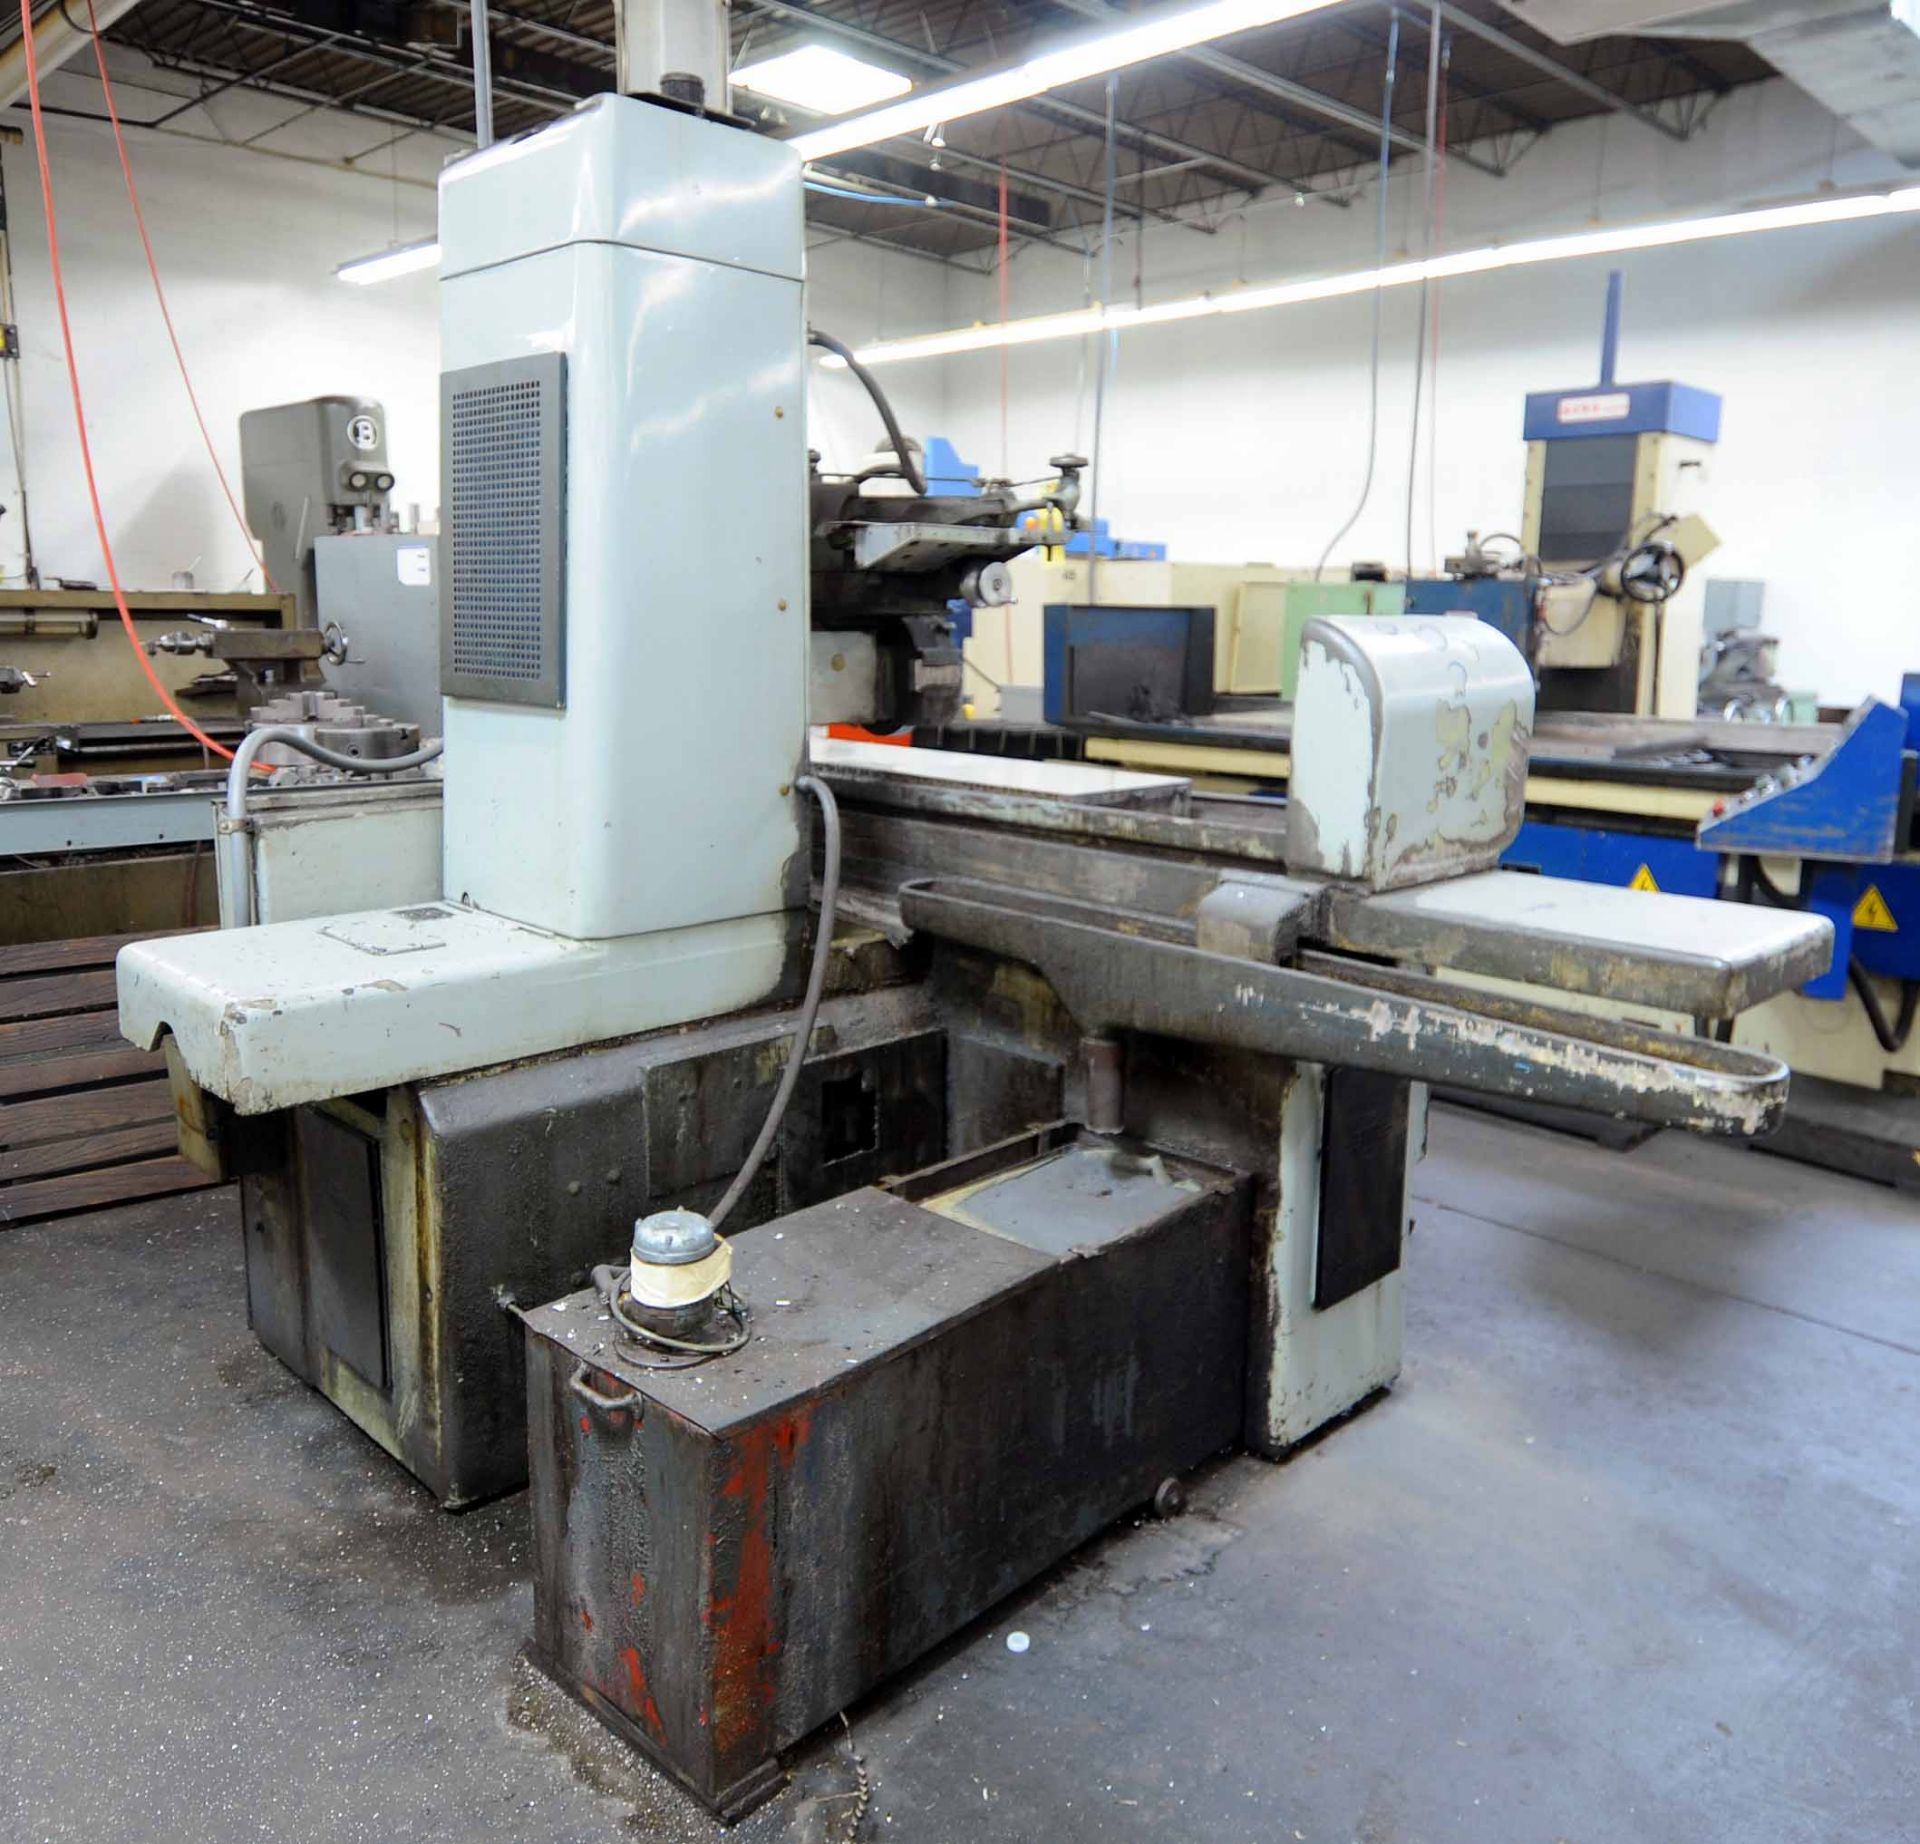 AUTOMATIC HYDRAULIC SURFACE GRINDER, ELB 14" X 48", Type SW12VAI-Z, 14" x 48" electromagnetic chuck, - Image 4 of 4